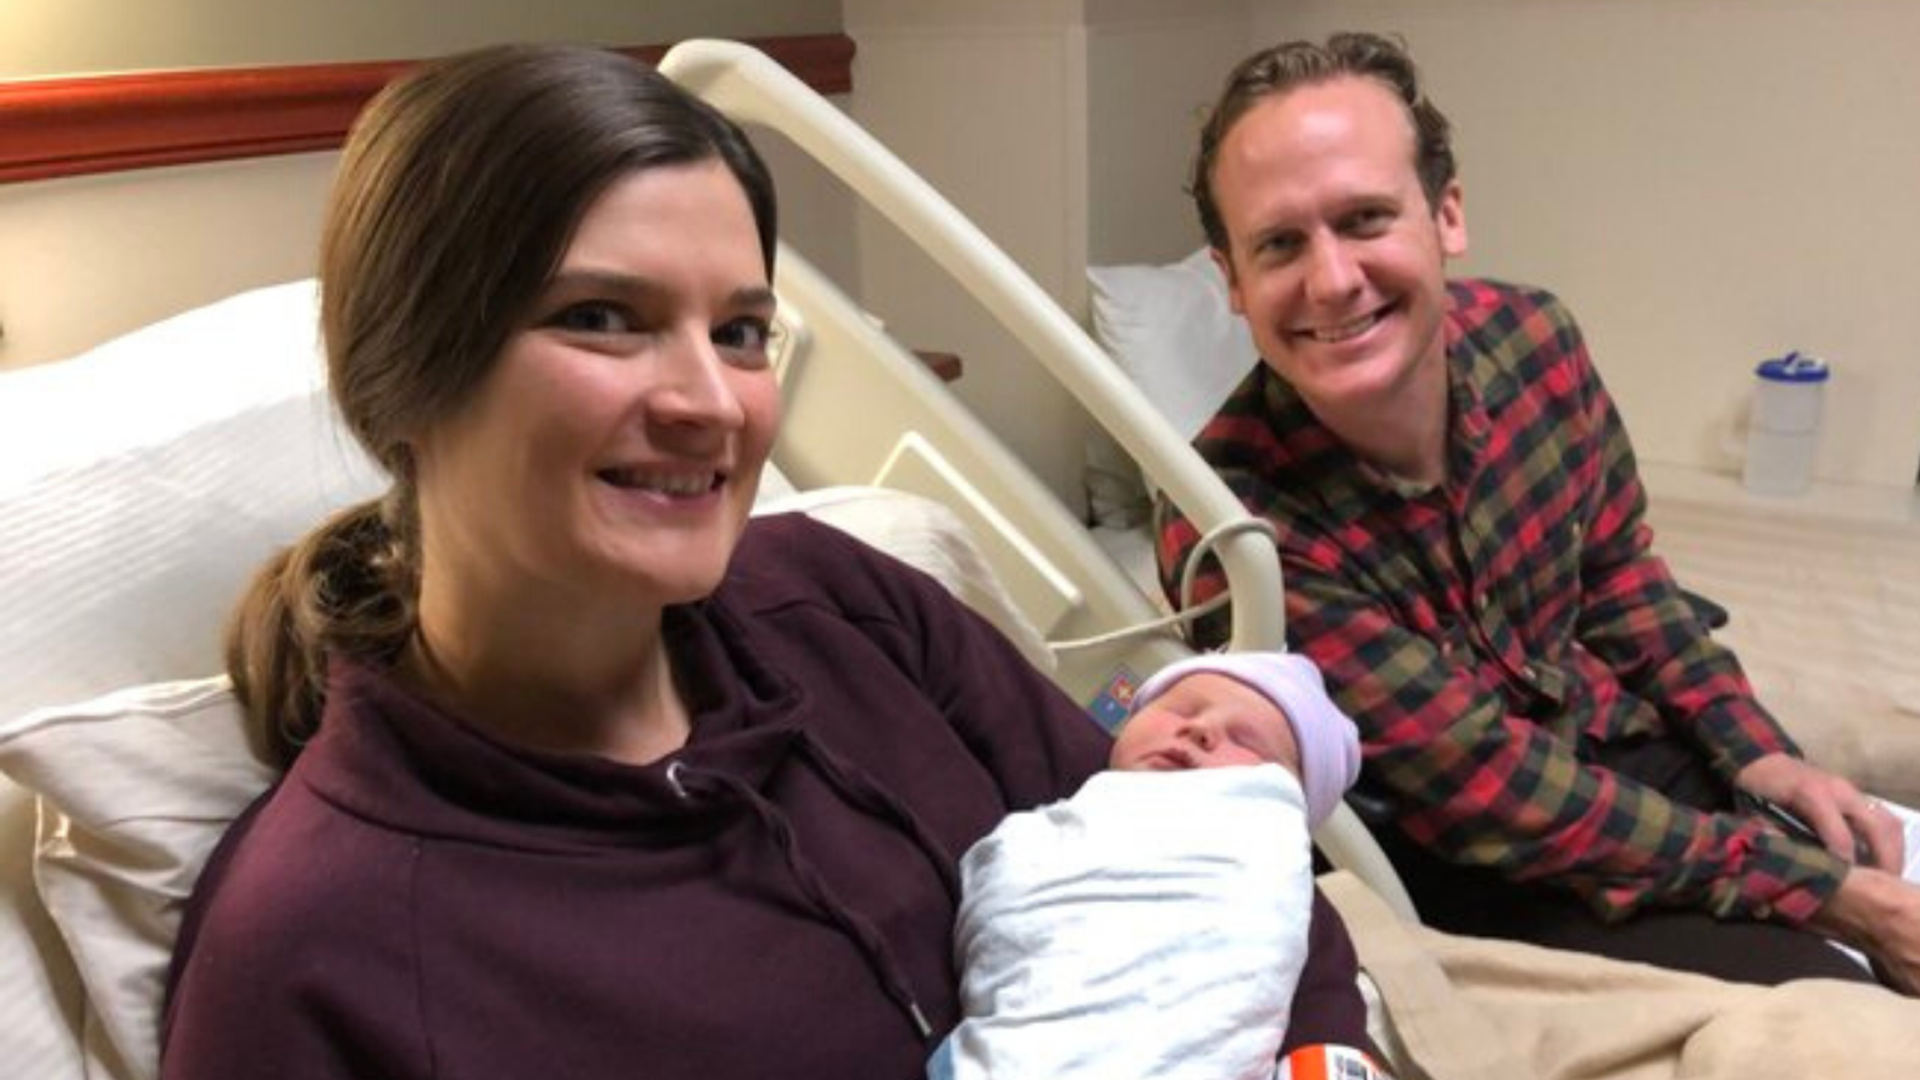 Their baby made her grand entrance at 7:57 a.m. on Halloween morning.